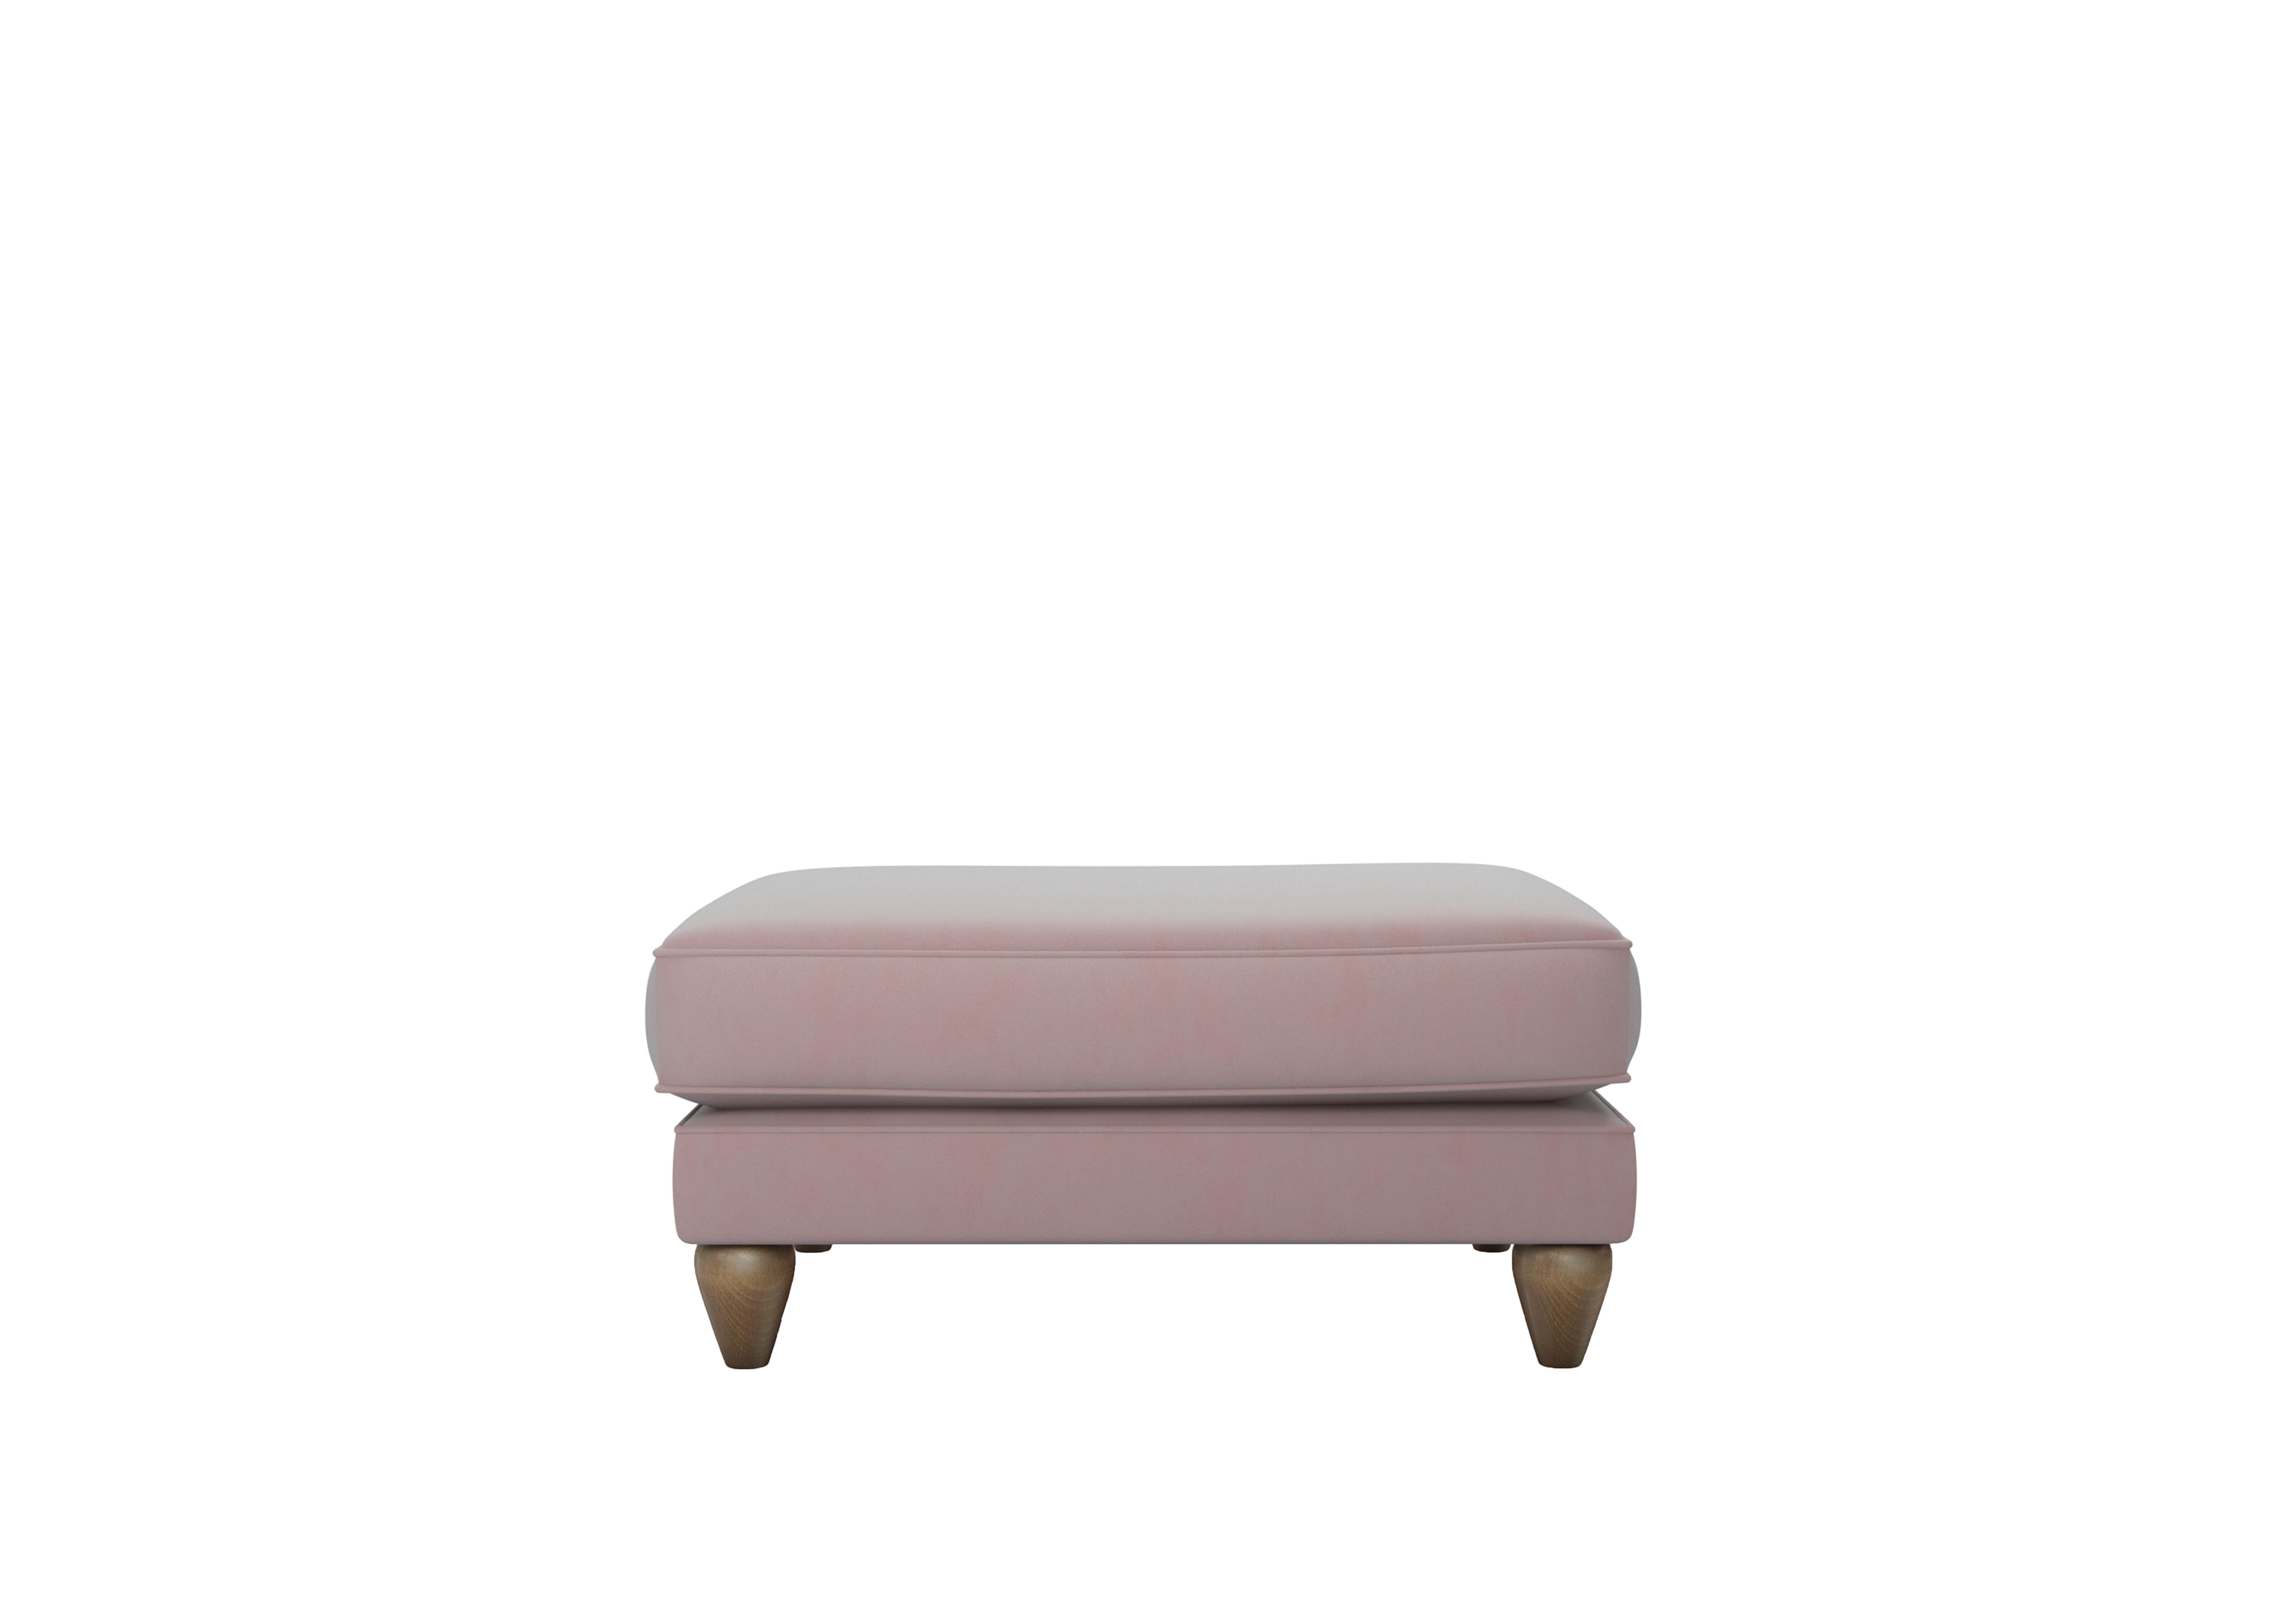 Bronwyn Fabric Footstool in Cot256 Cotton Candy on Furniture Village